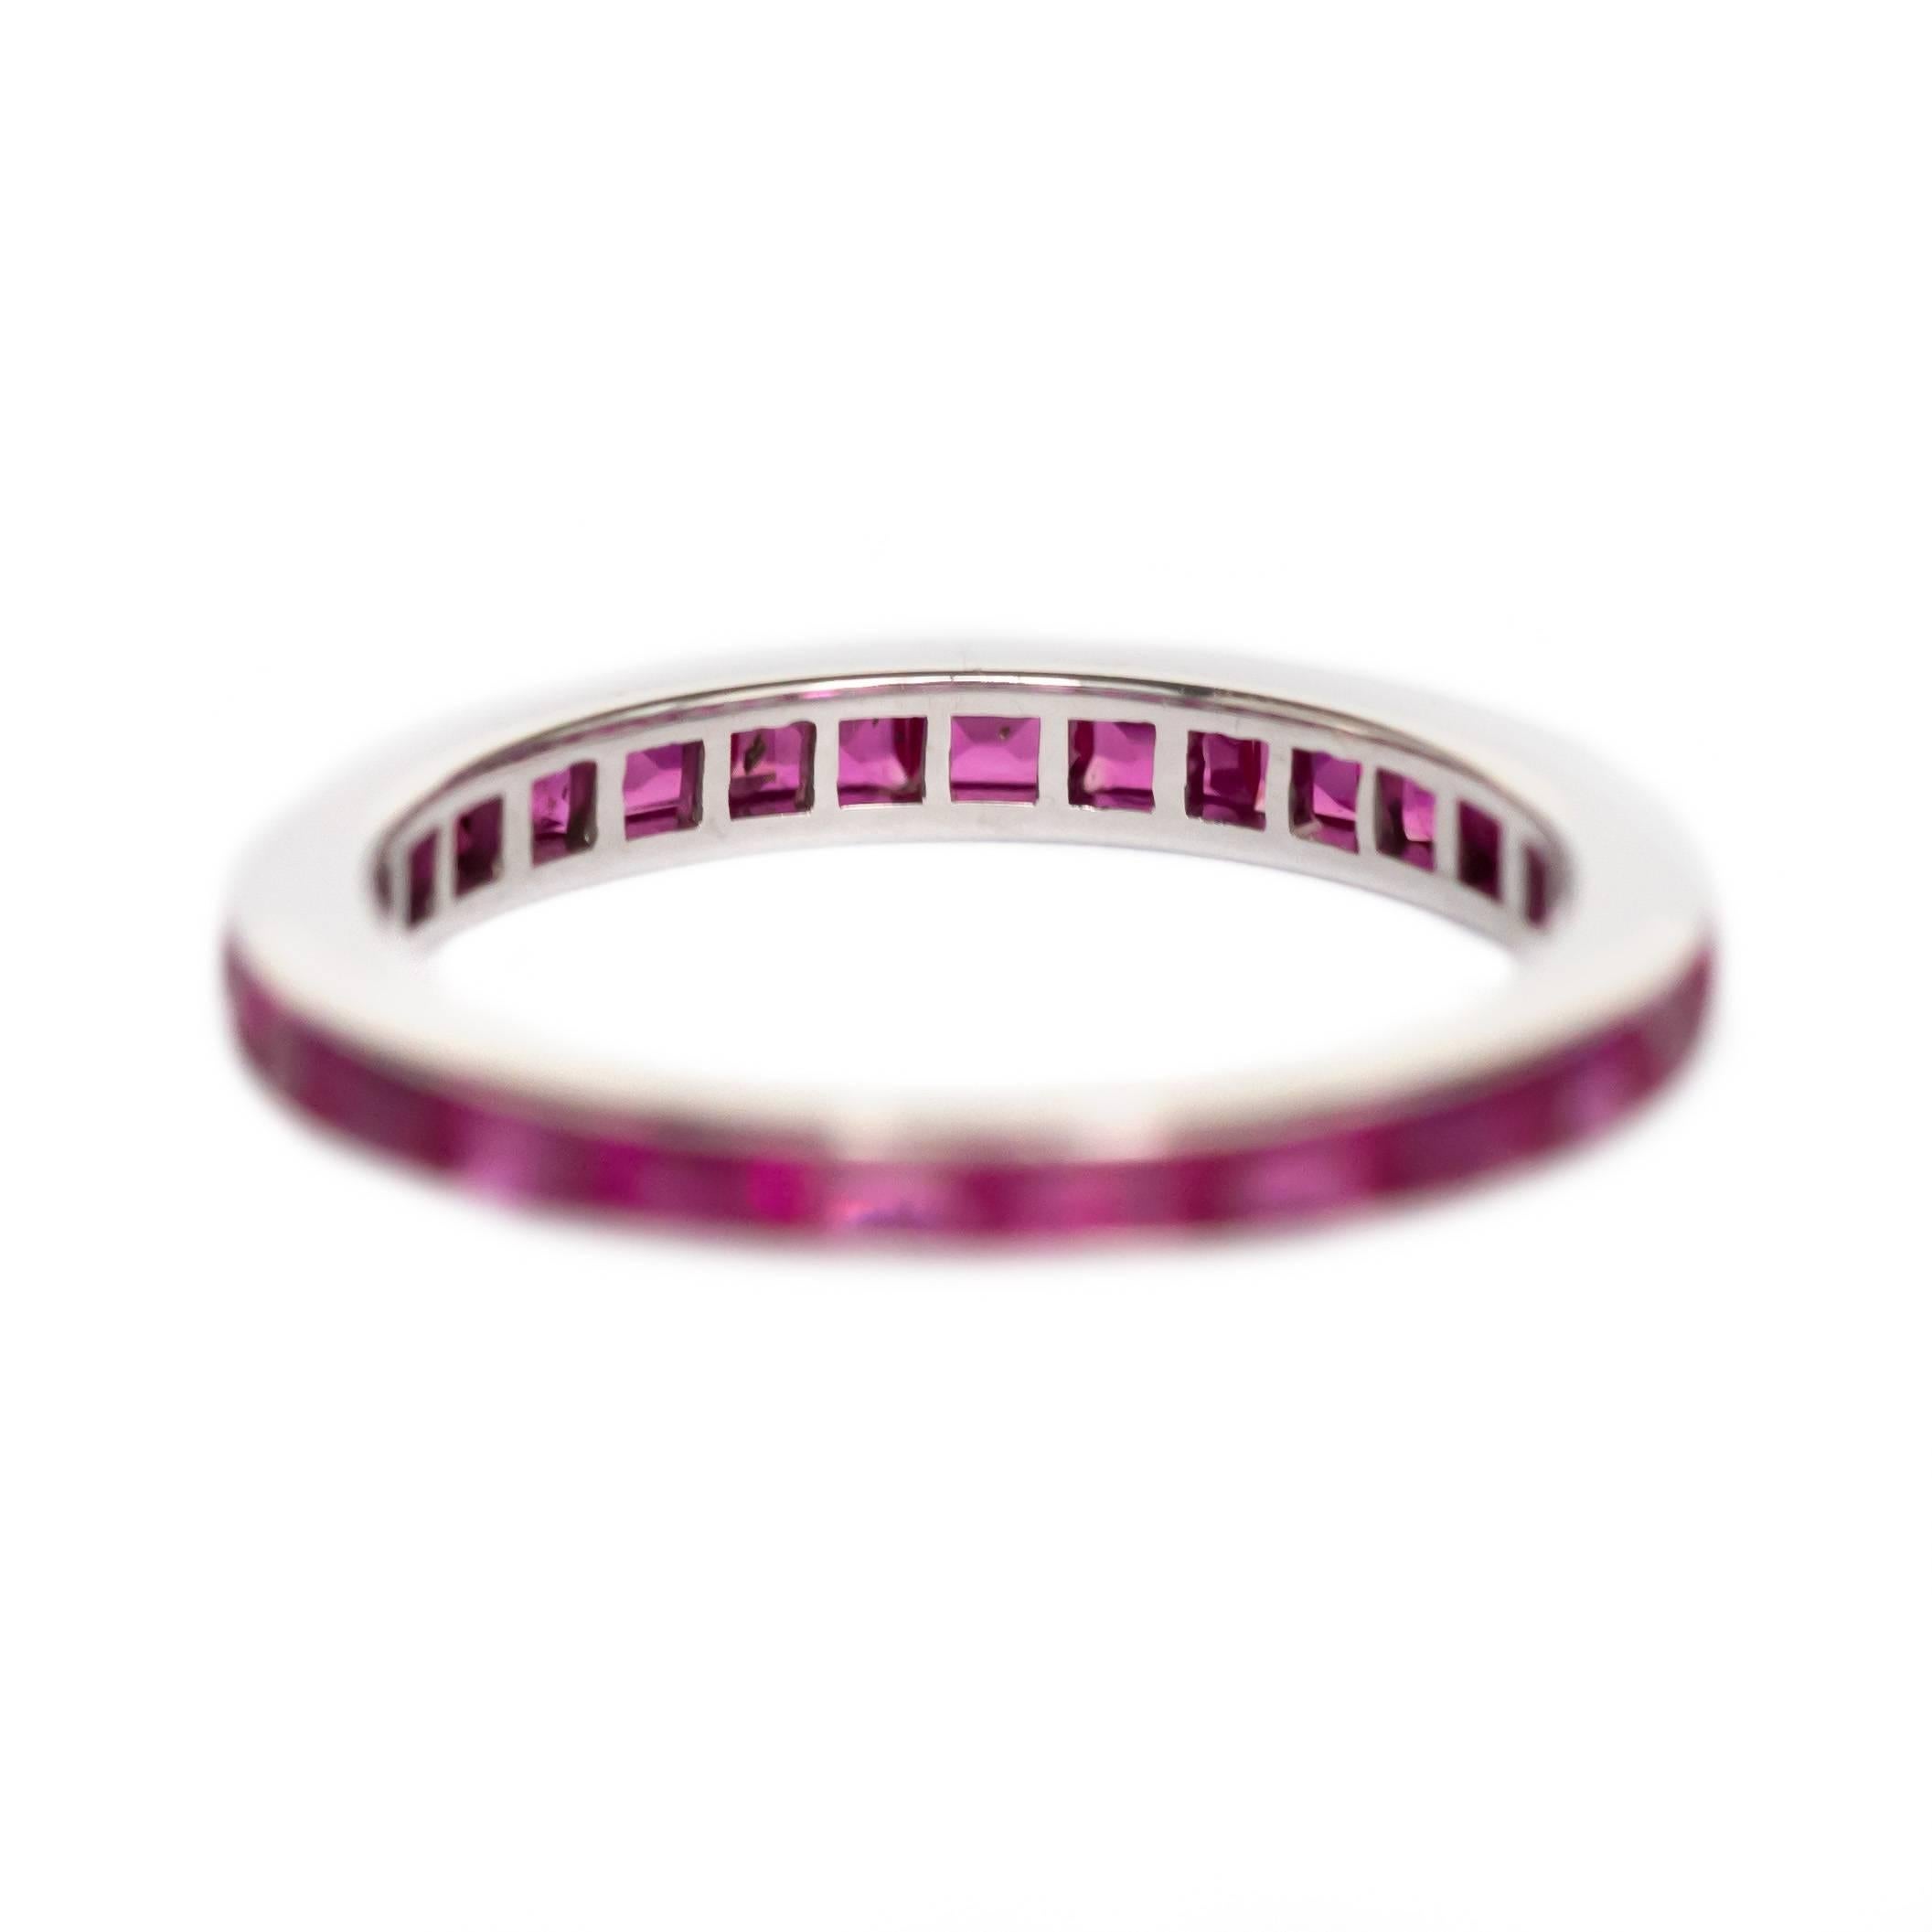 Item Details: 
Ring Size: Approximately 6.20
Metal Type: 14 Karat White Gold
Weight: 1.8 grams

Color Stone Details: 
Type: Synthetic Ruby
Shape: Princess Cut
Carat Weight: 1.00 carat, total weight.
Color: Deep Red
VS Clean

Width of band: 2.63